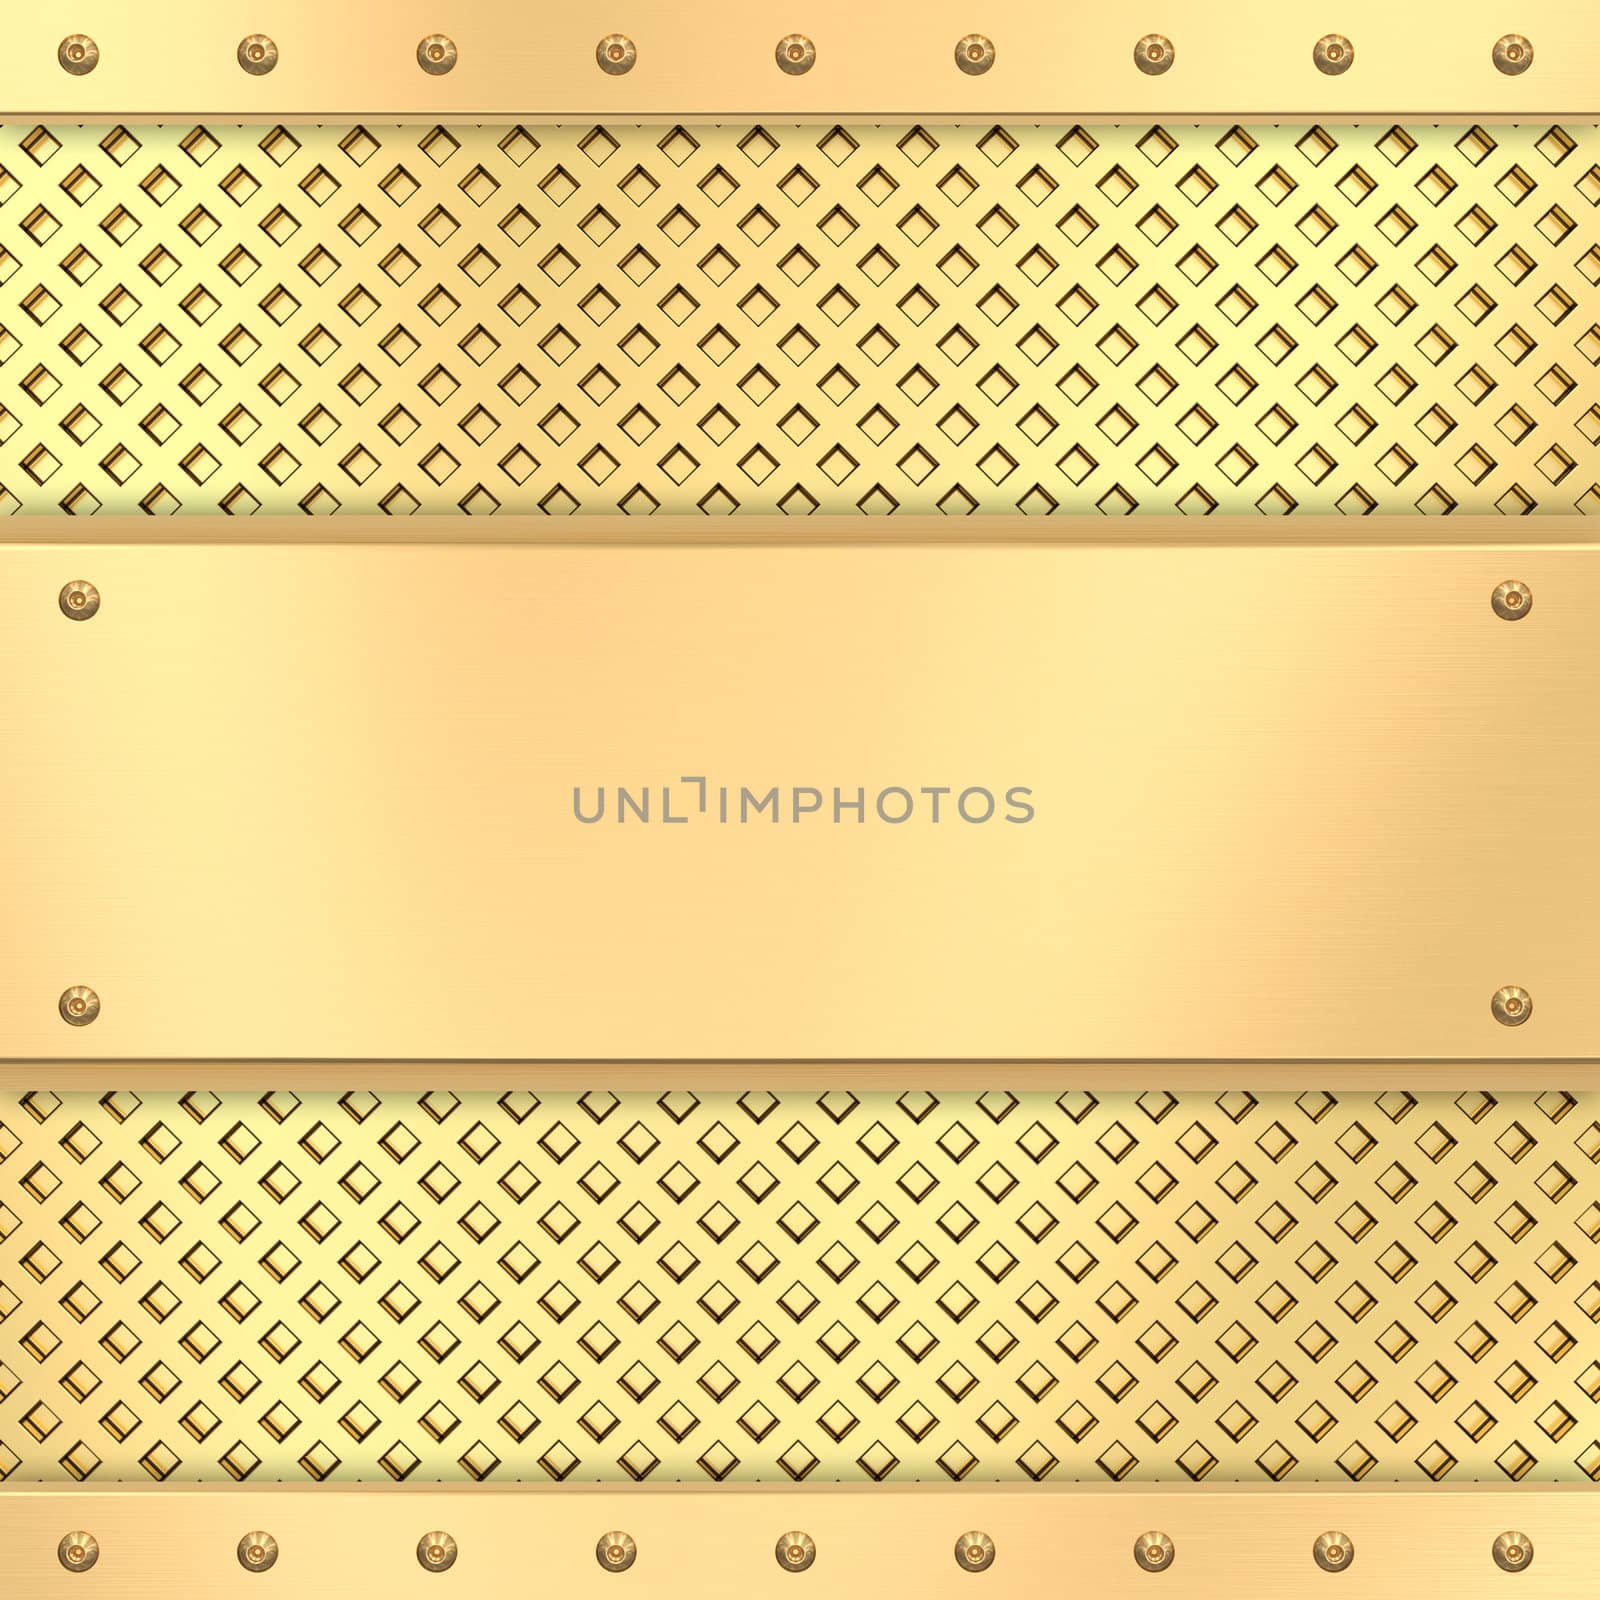 Blank golden plate on grid background with rivets. High resolution 3D image
